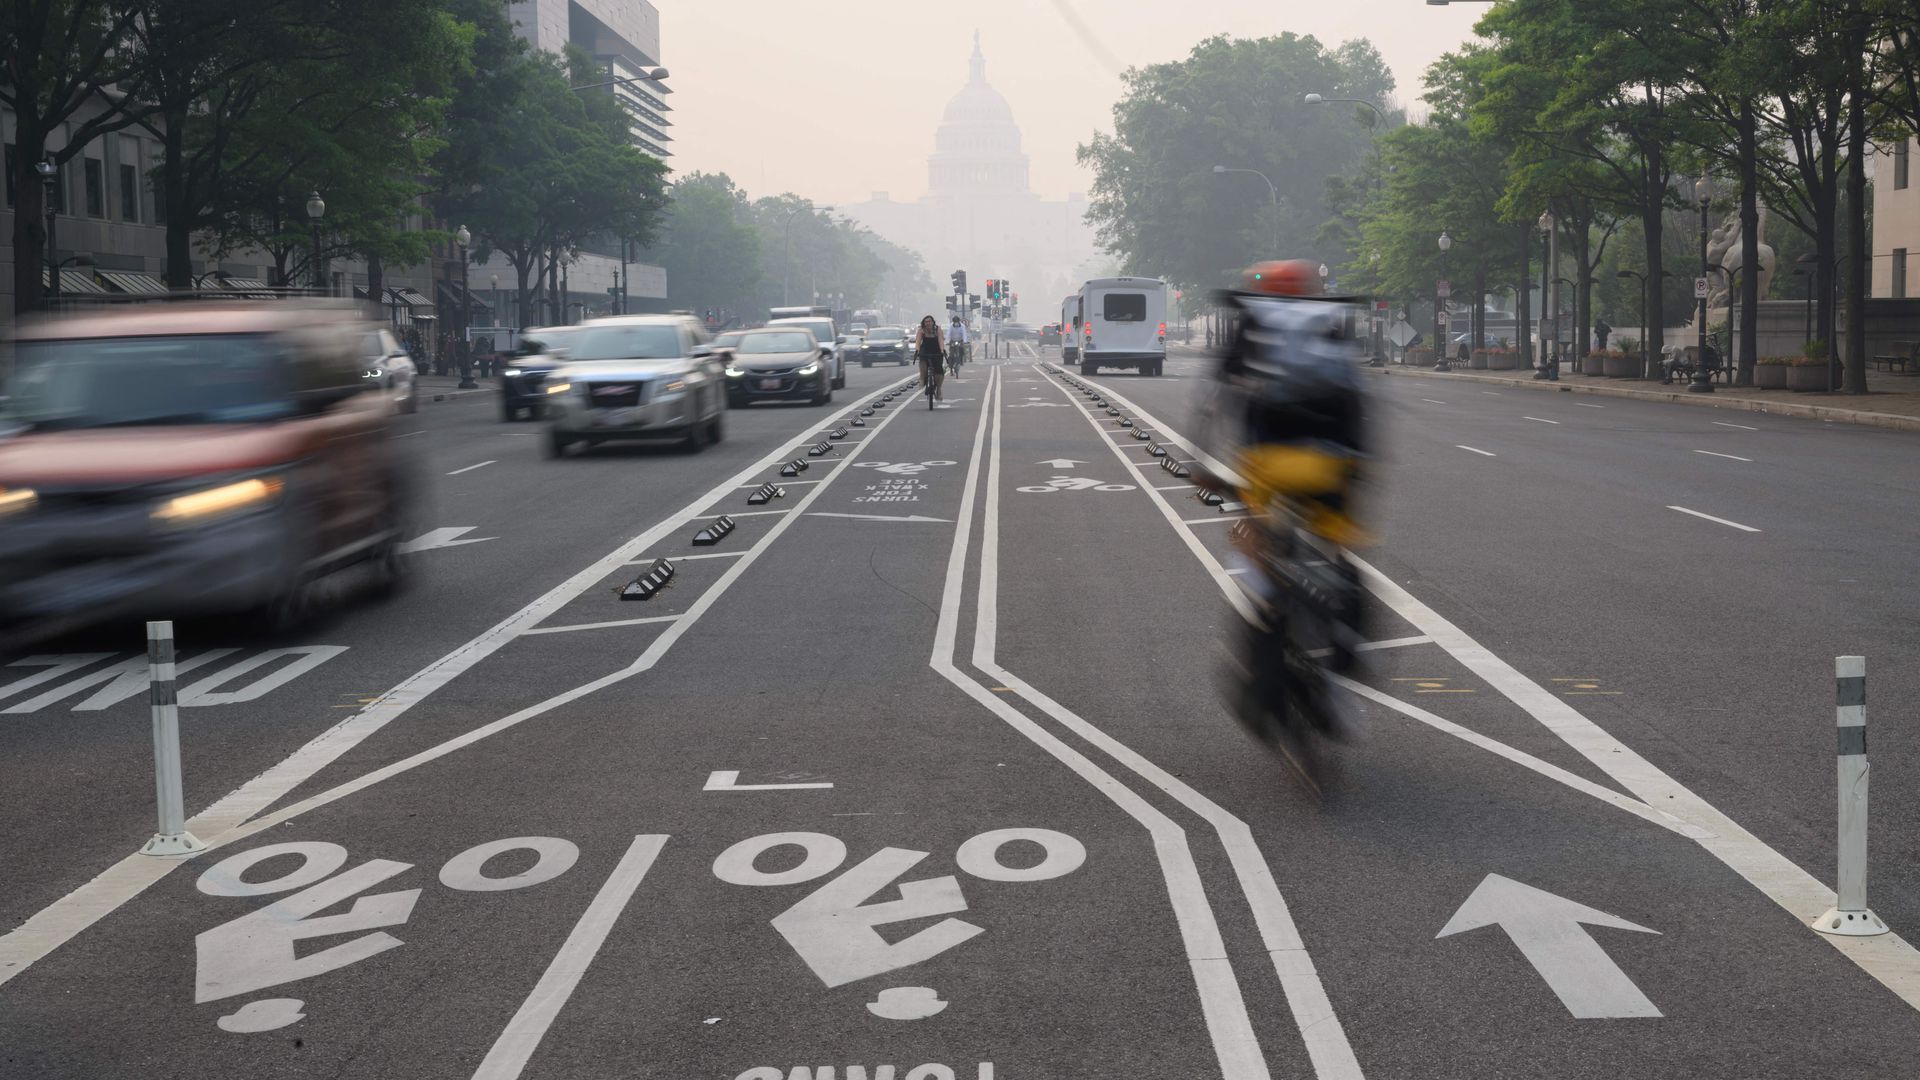 A person rides a bicycle on Pennsylvania Avenue with haze in the background obscuring the U.S. Capitol building